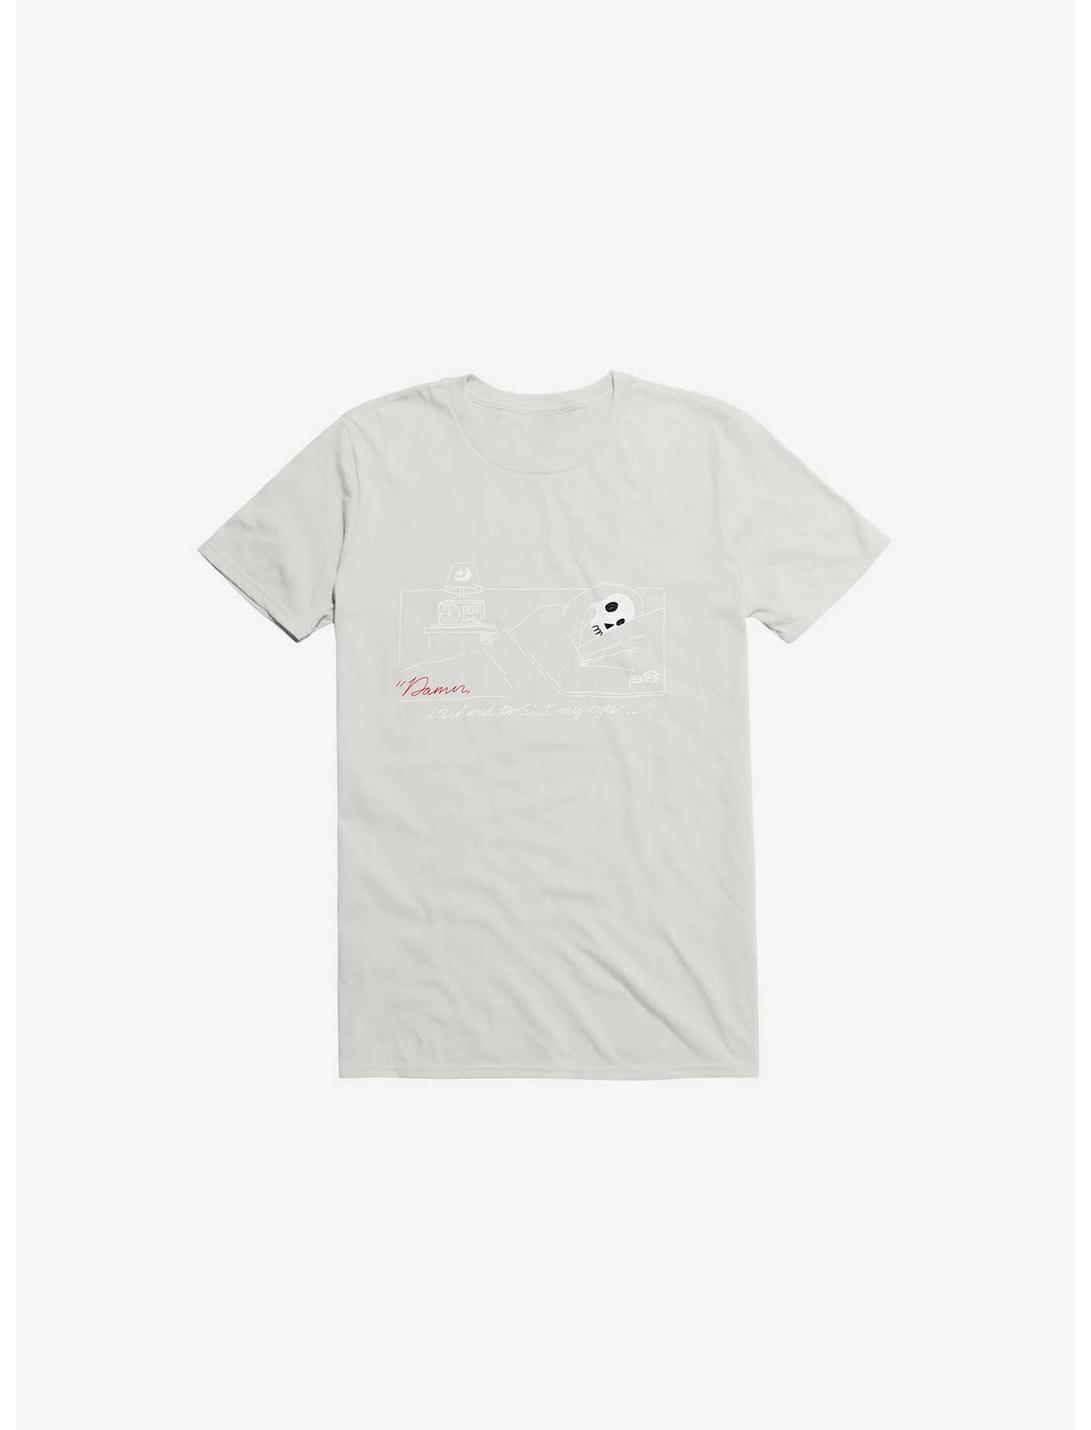 Damn, Sleepy Time Is Out T-Shirt, WHITE, hi-res